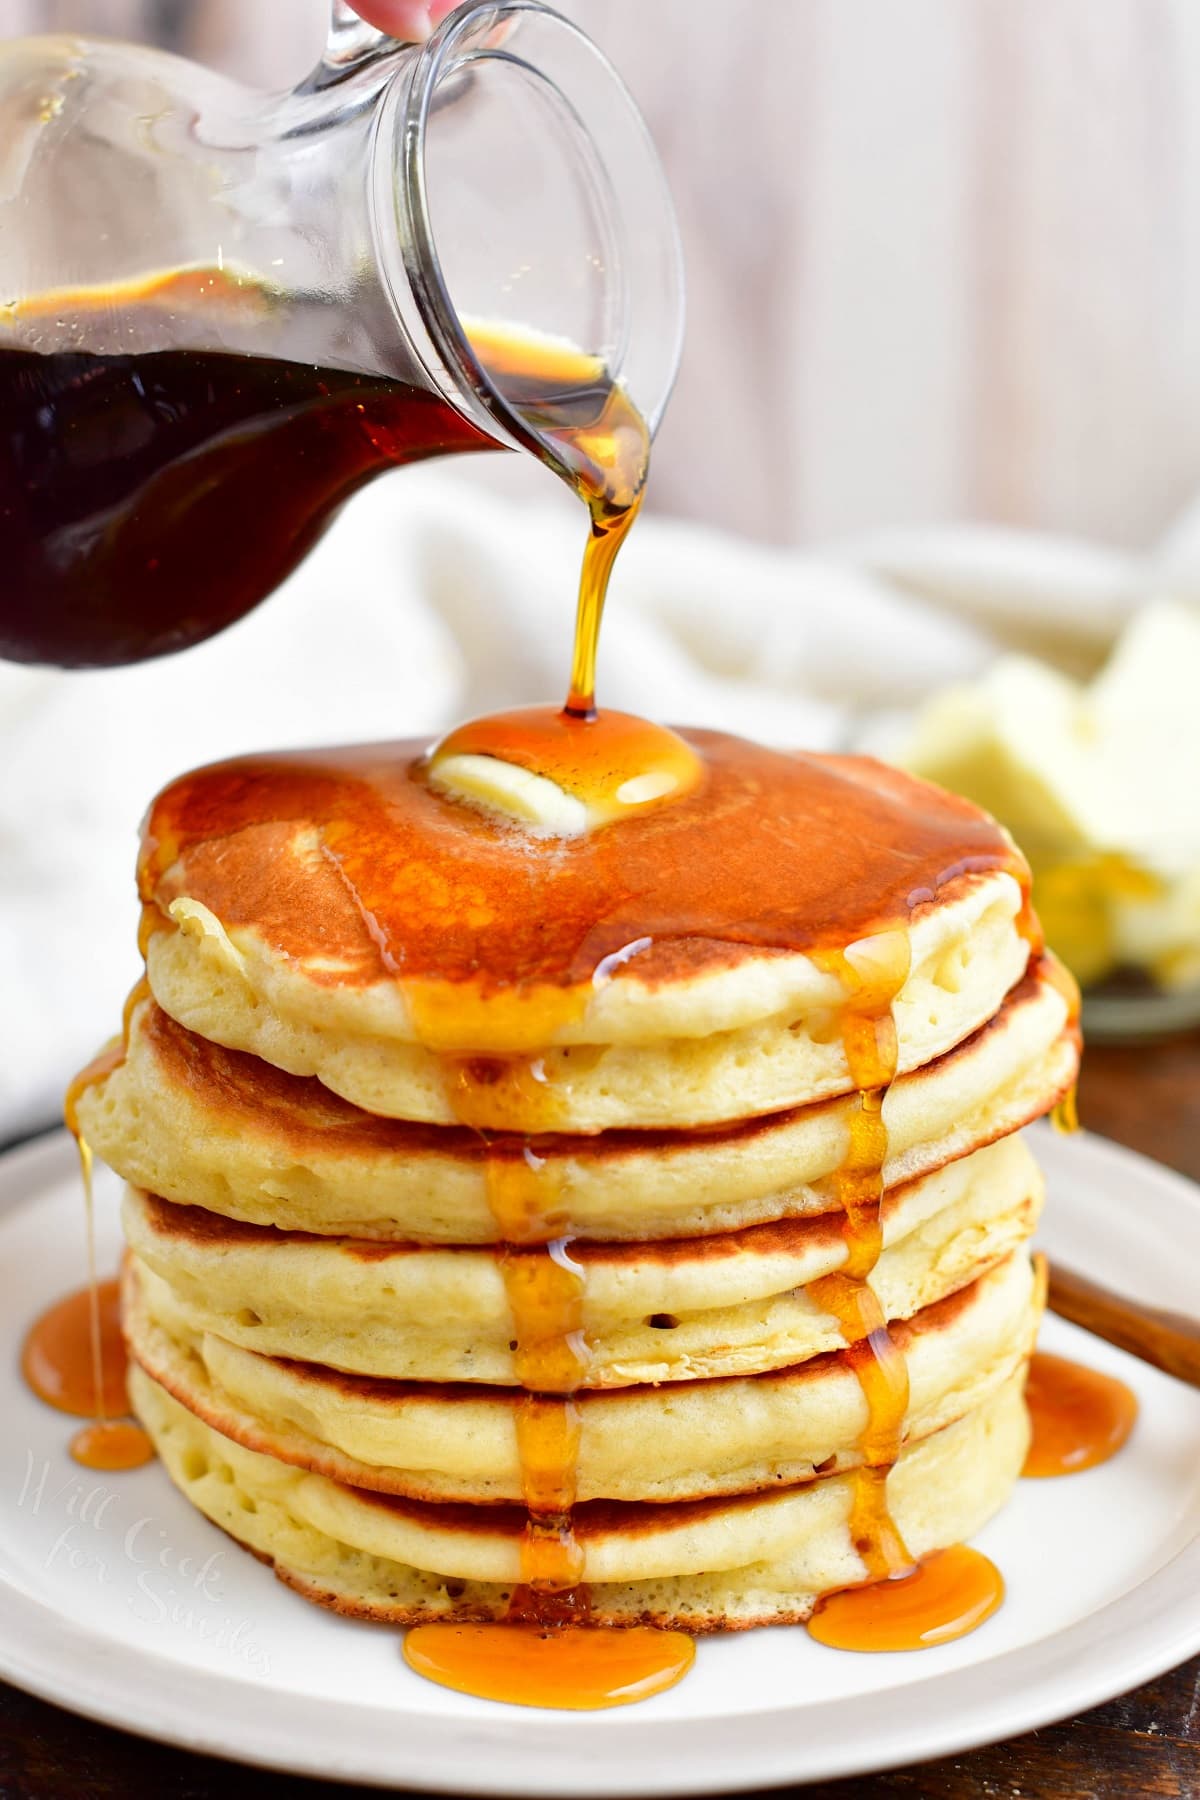 Maple syrup is being poured over a stack of buttermilk pancakes.